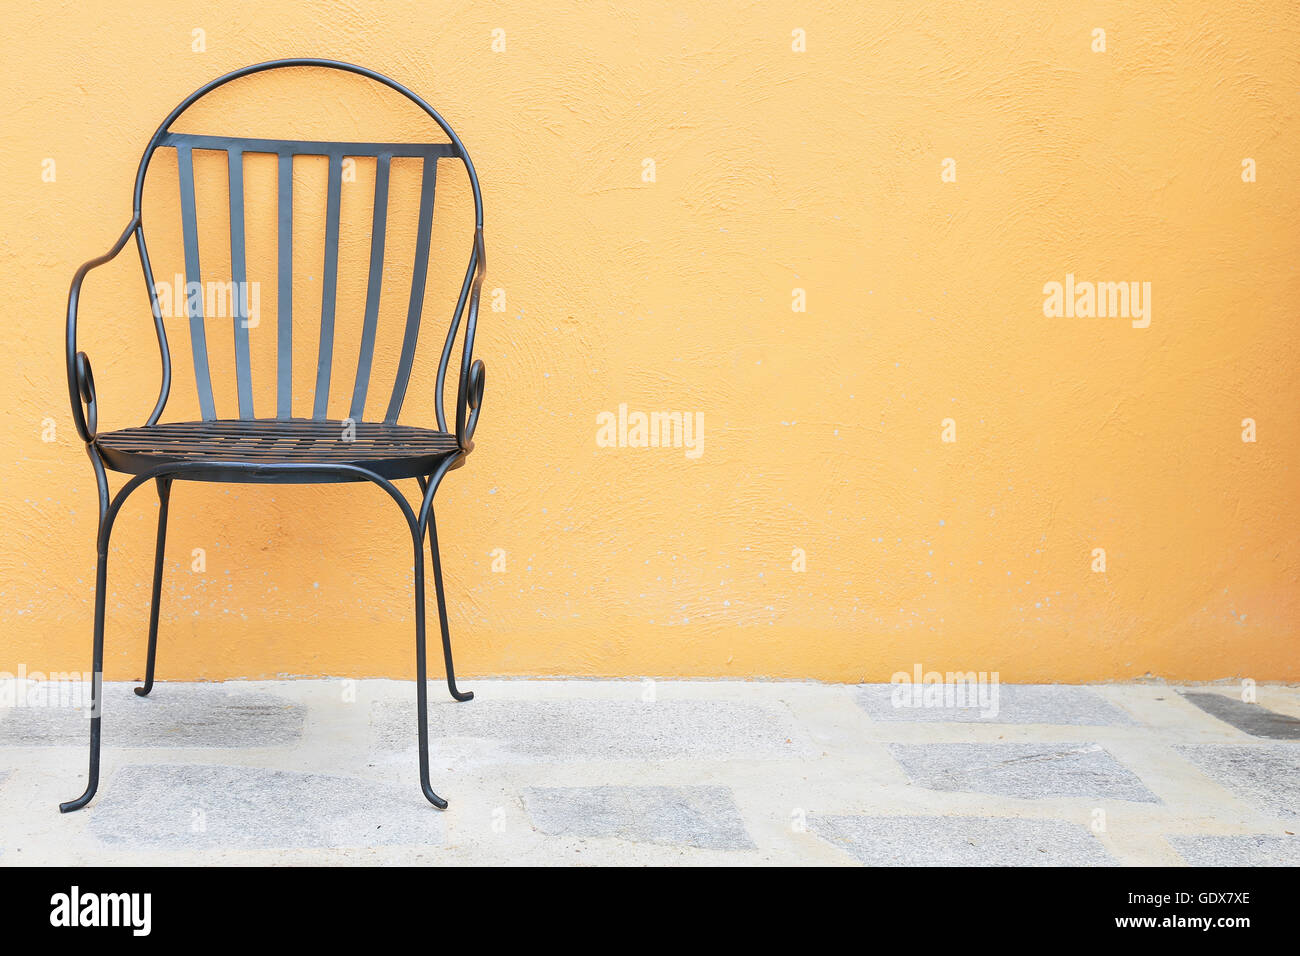 Chairs placed outside Stock Photo